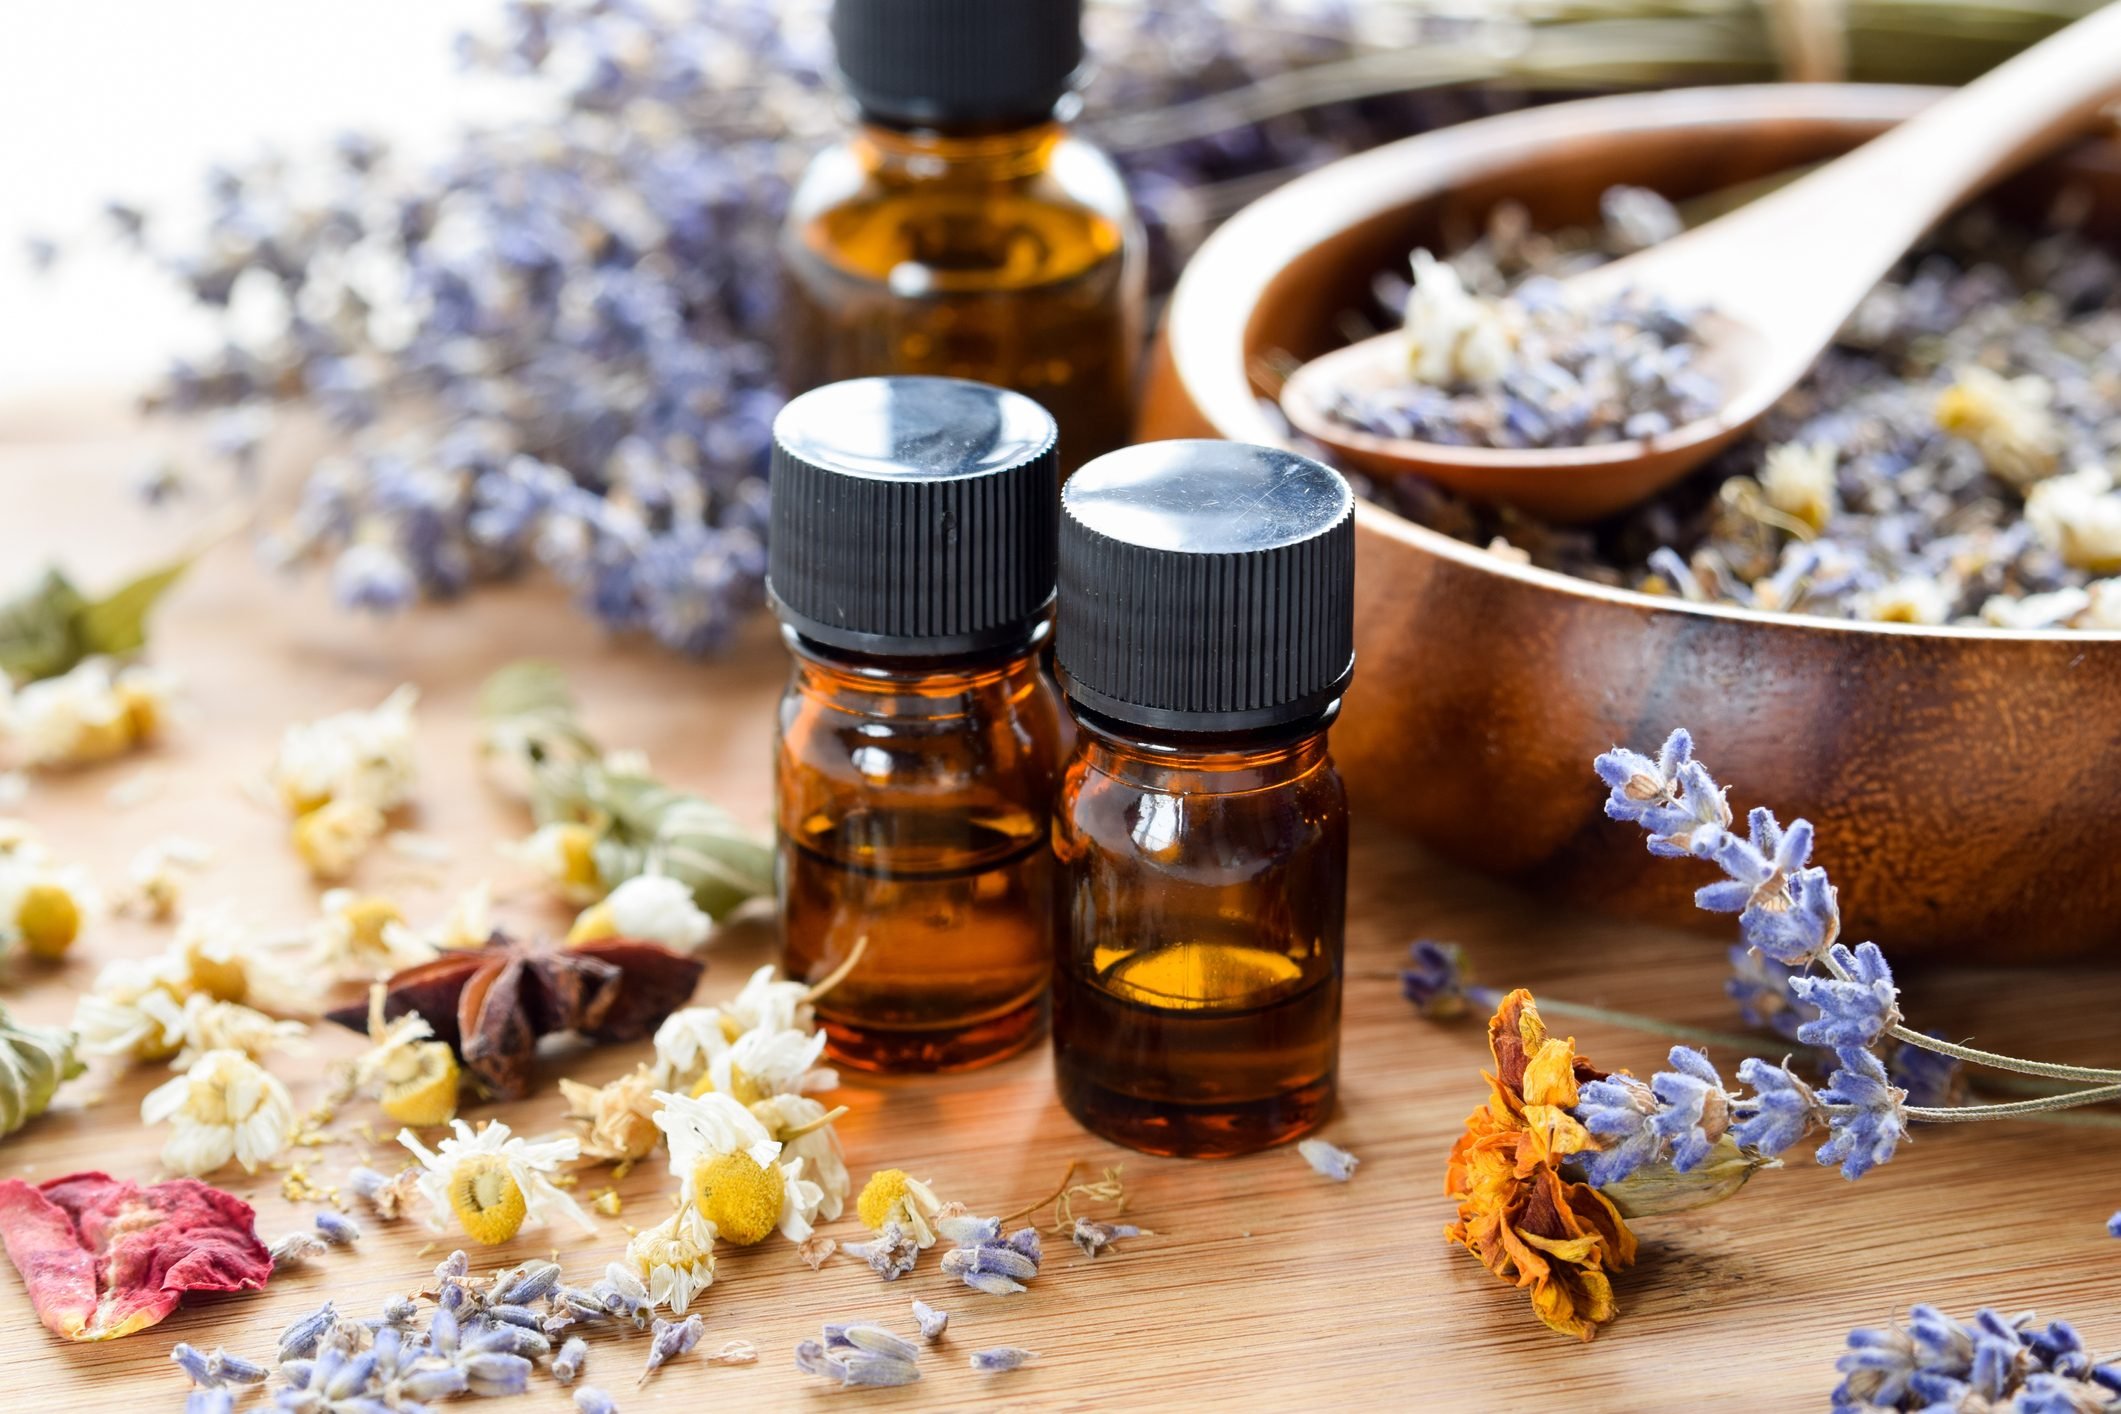 Are There Essential Oils for High Blood Pressure? Here's What the Experts Say